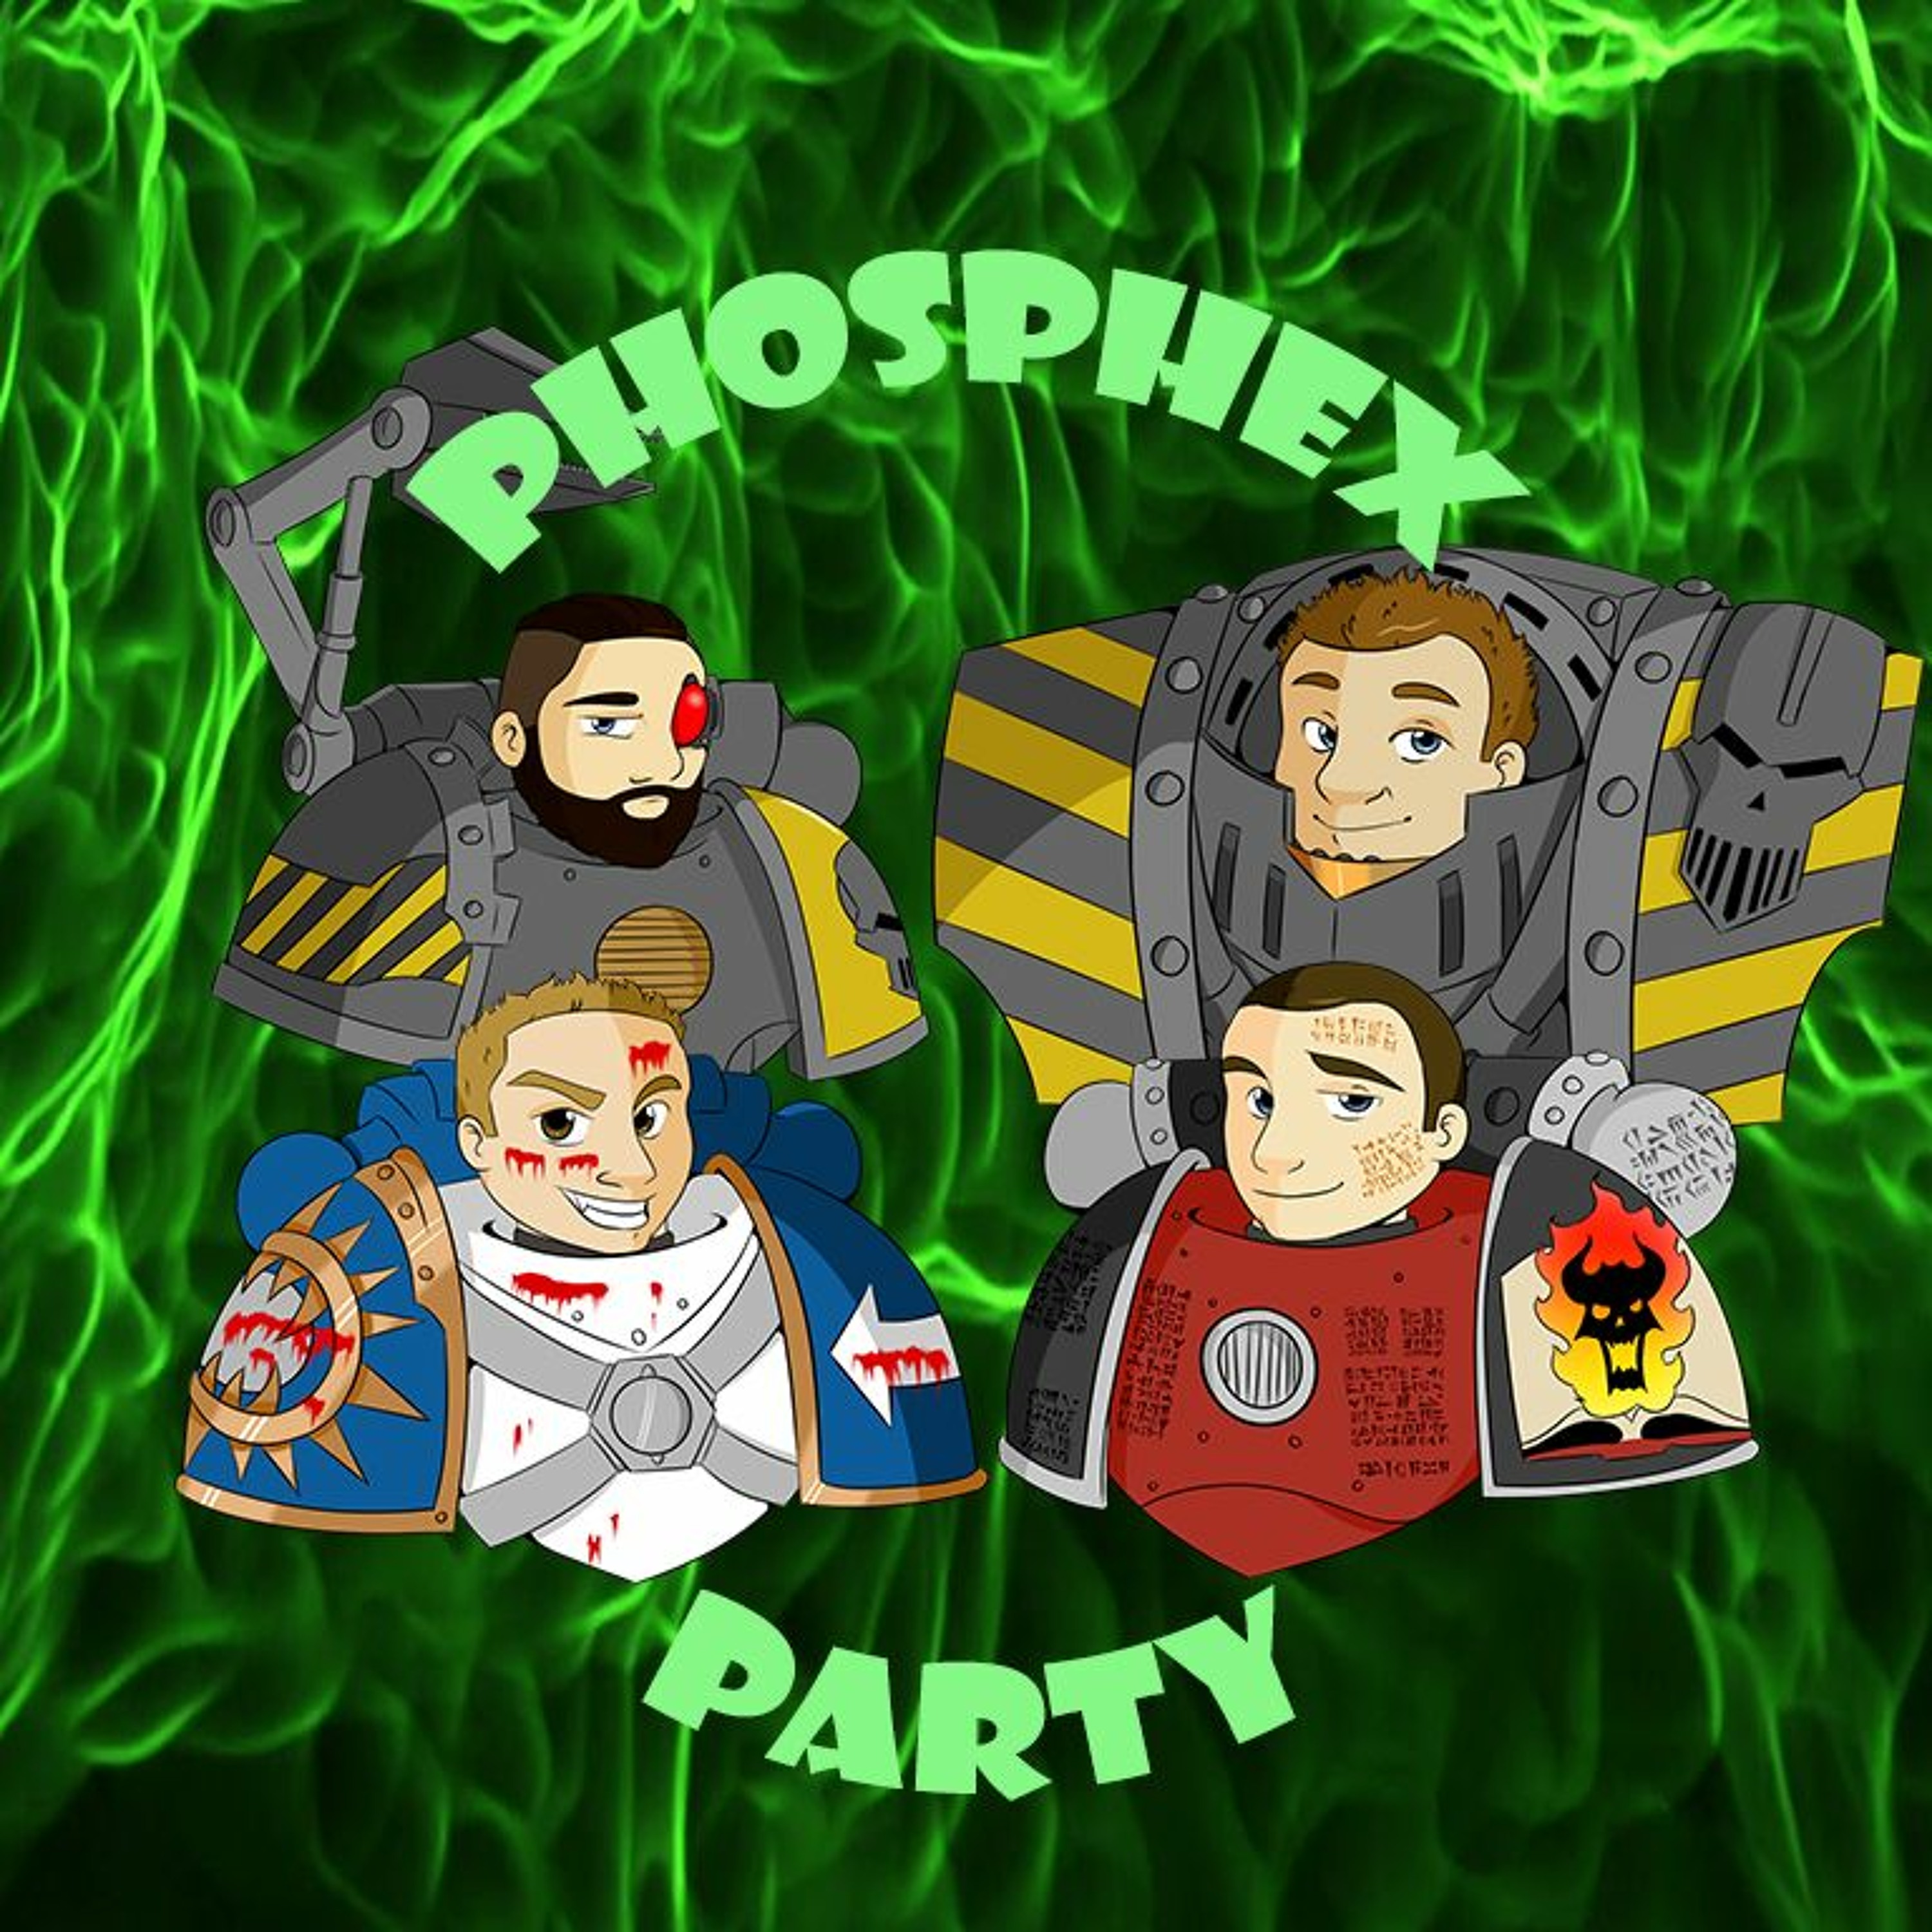 Phosphex Party Episode 12 - Furious Graham vs Baby Yoda The Easter Special